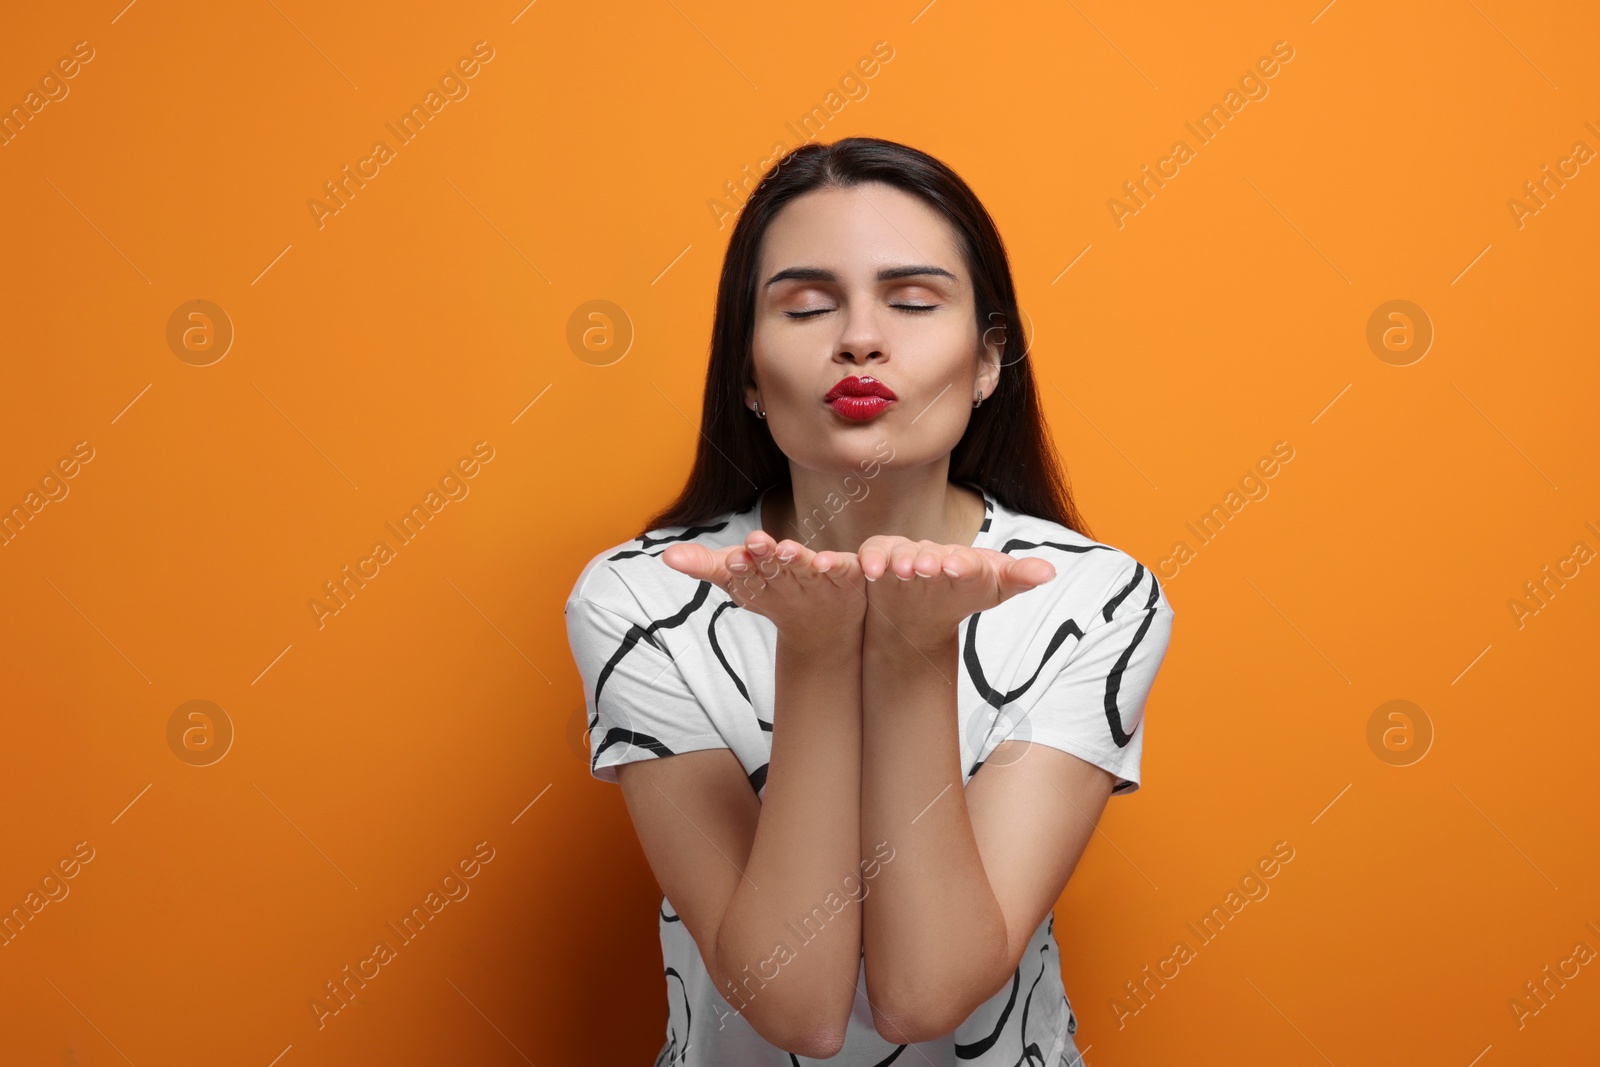 Photo of Beautiful young woman blowing kiss on orange background